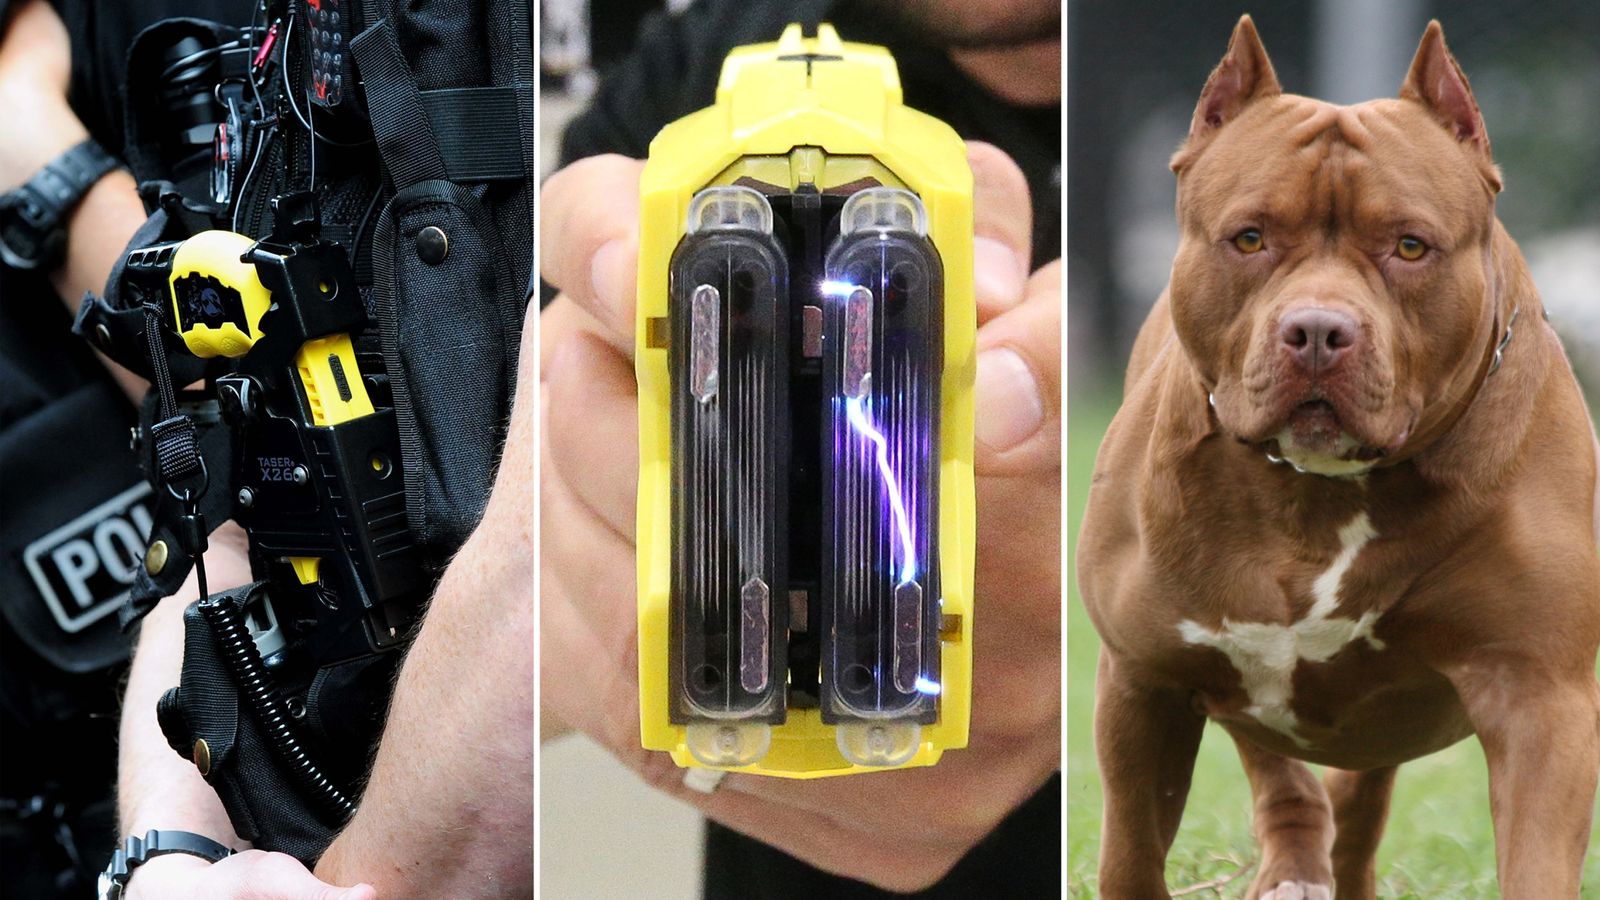 Police fired Tasers at children as young as 13 and dozens of dogs in